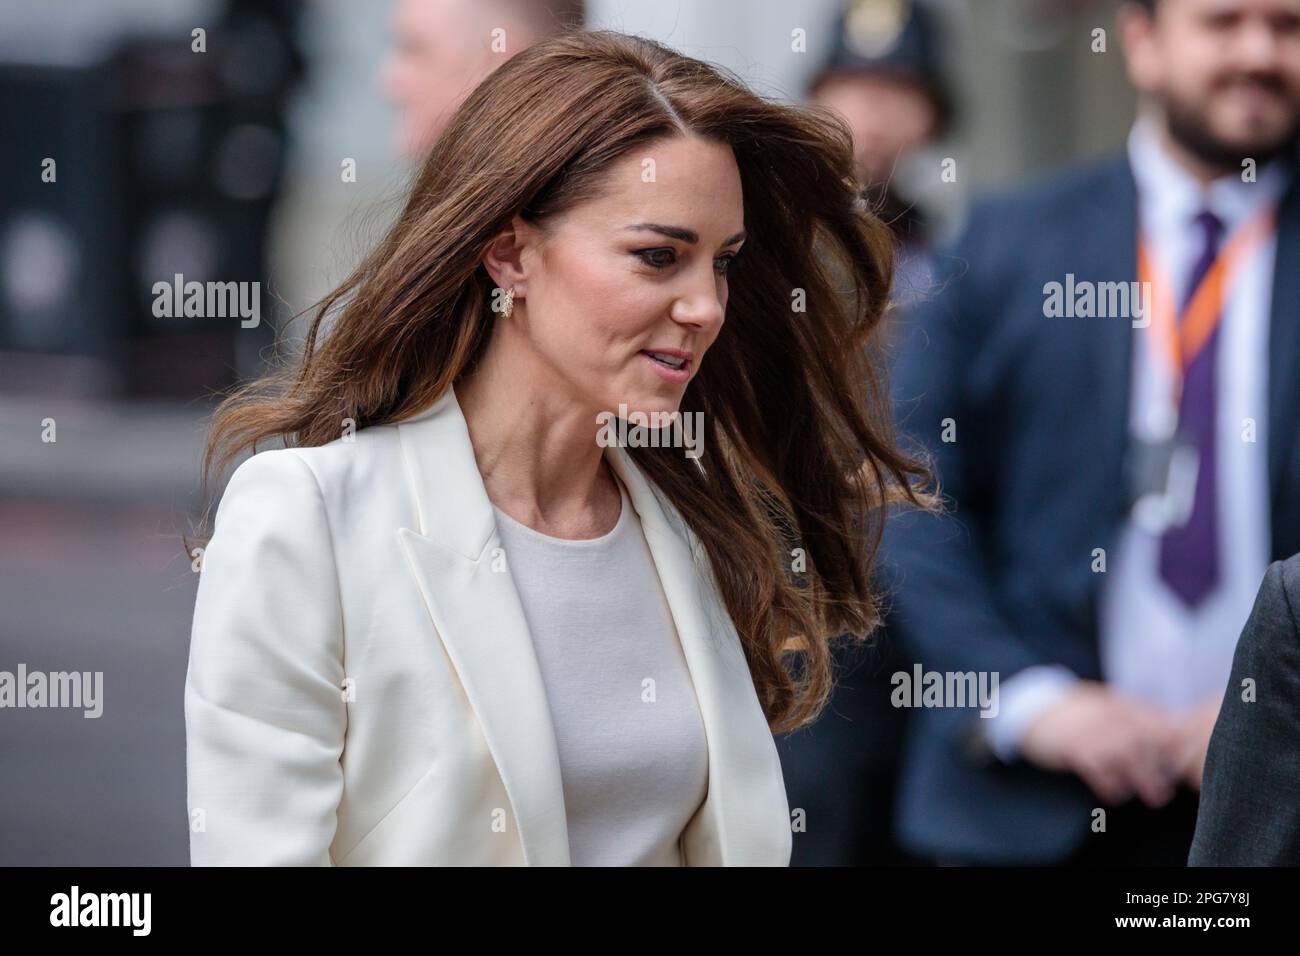 City of London., UK. 21st March 2023. The Princess of Wales attends the inaugural meeting of her new Business Taskforce for Early Childhood at NatWest’s headquarters in the City of London. Photo by Amanda Rose/Alamy Live News Stock Photo